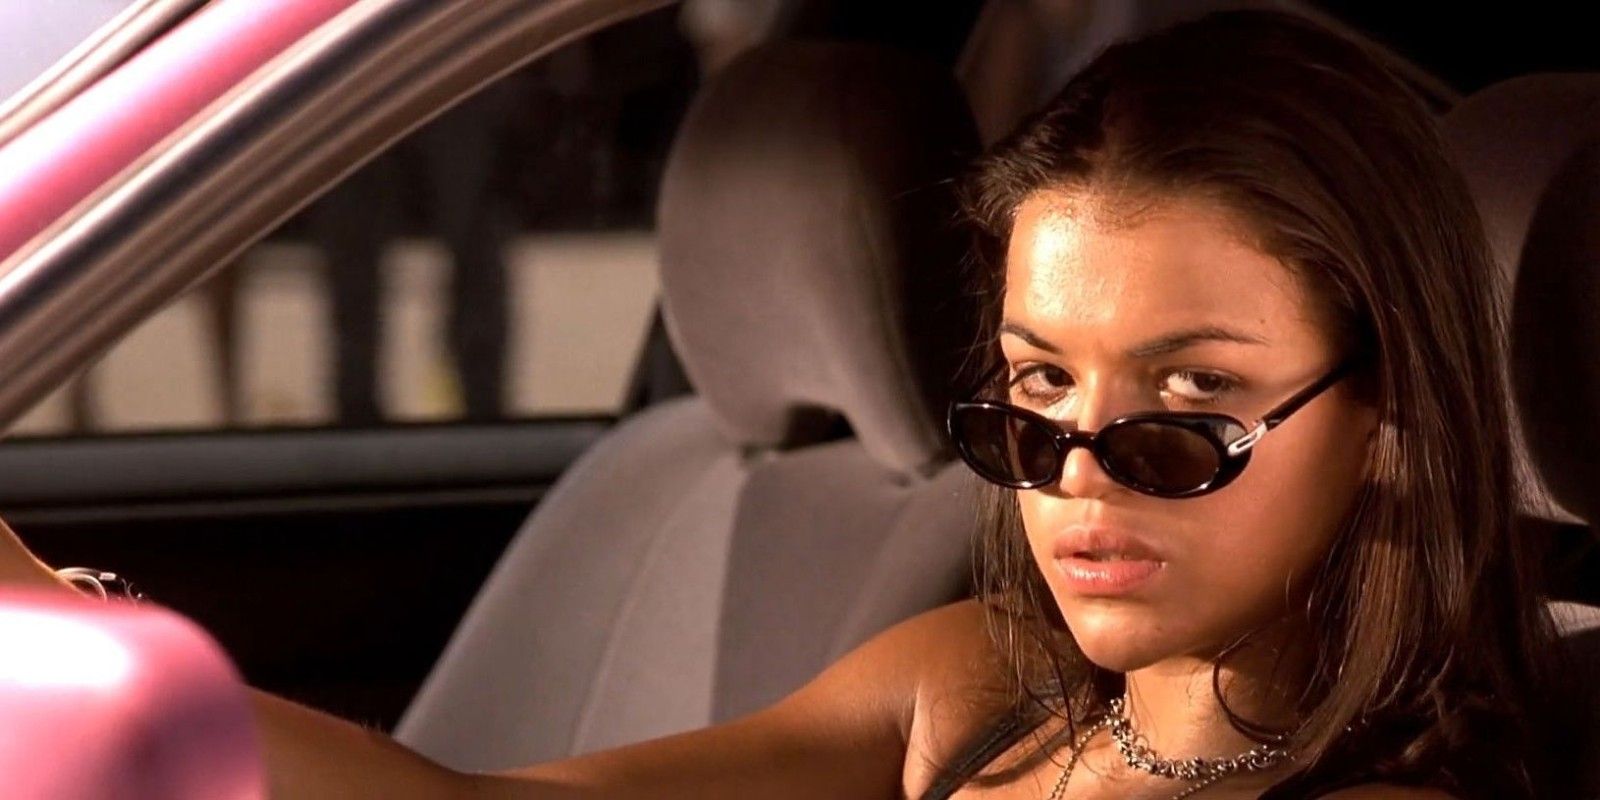 Letty looks sideways while sitting inside a car in The Fast and the Furious